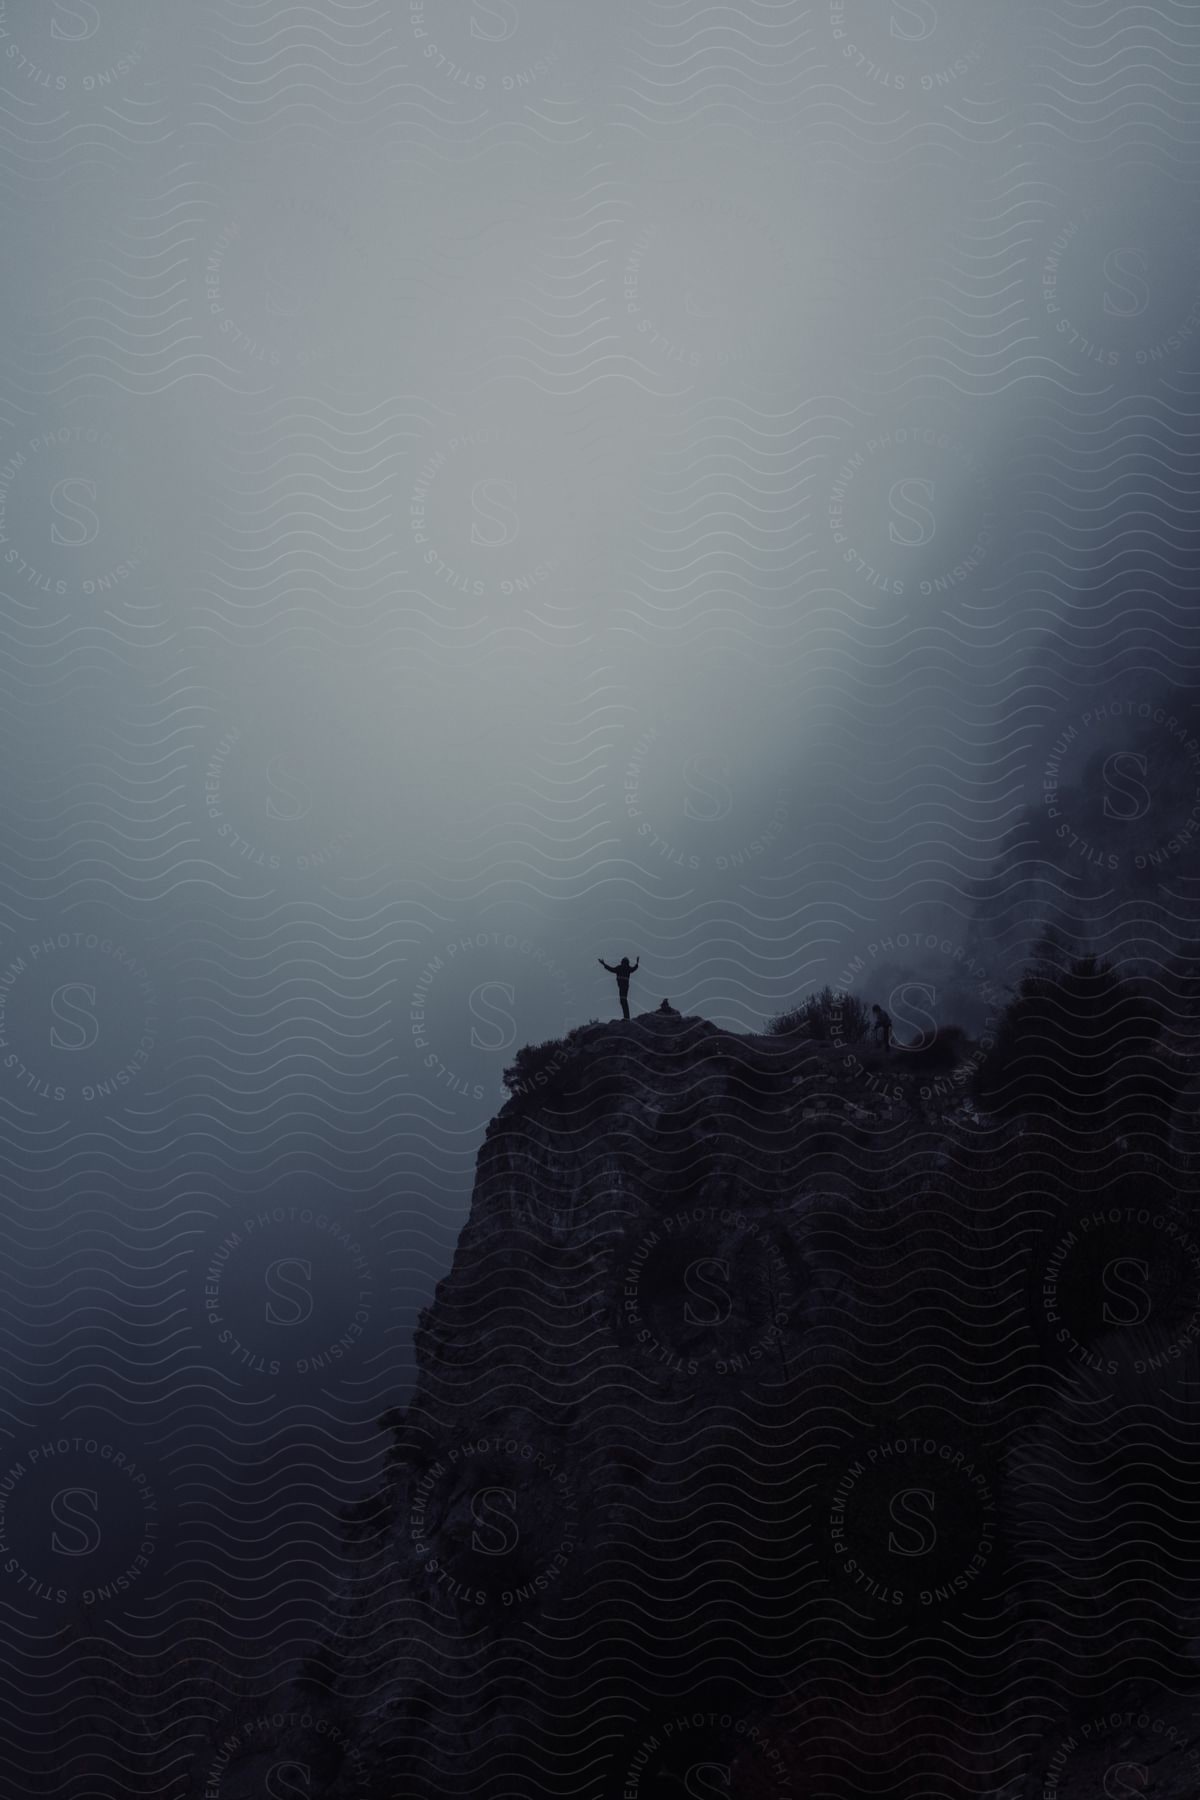 Silhouette of person standing on mountain ledge facing thick fog at dusk or dawn